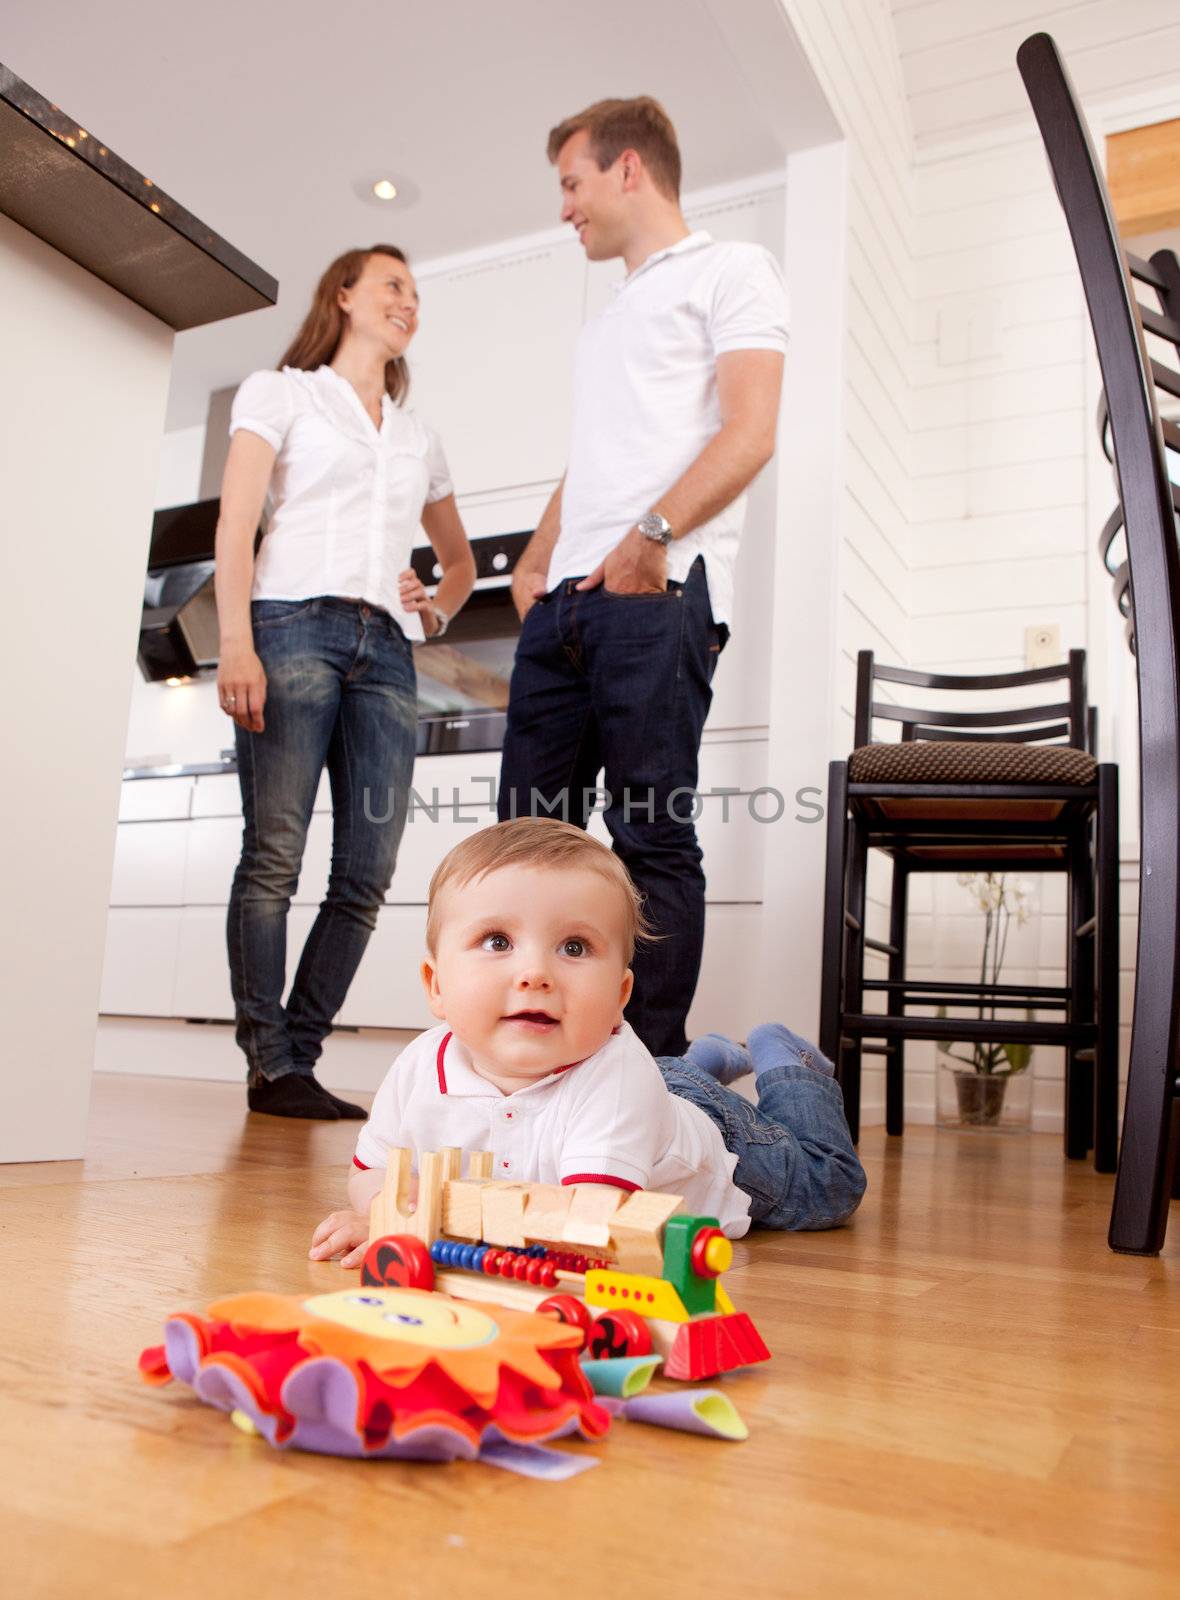 A young child boy playing on the kitchen floor with happy parents talking in the background